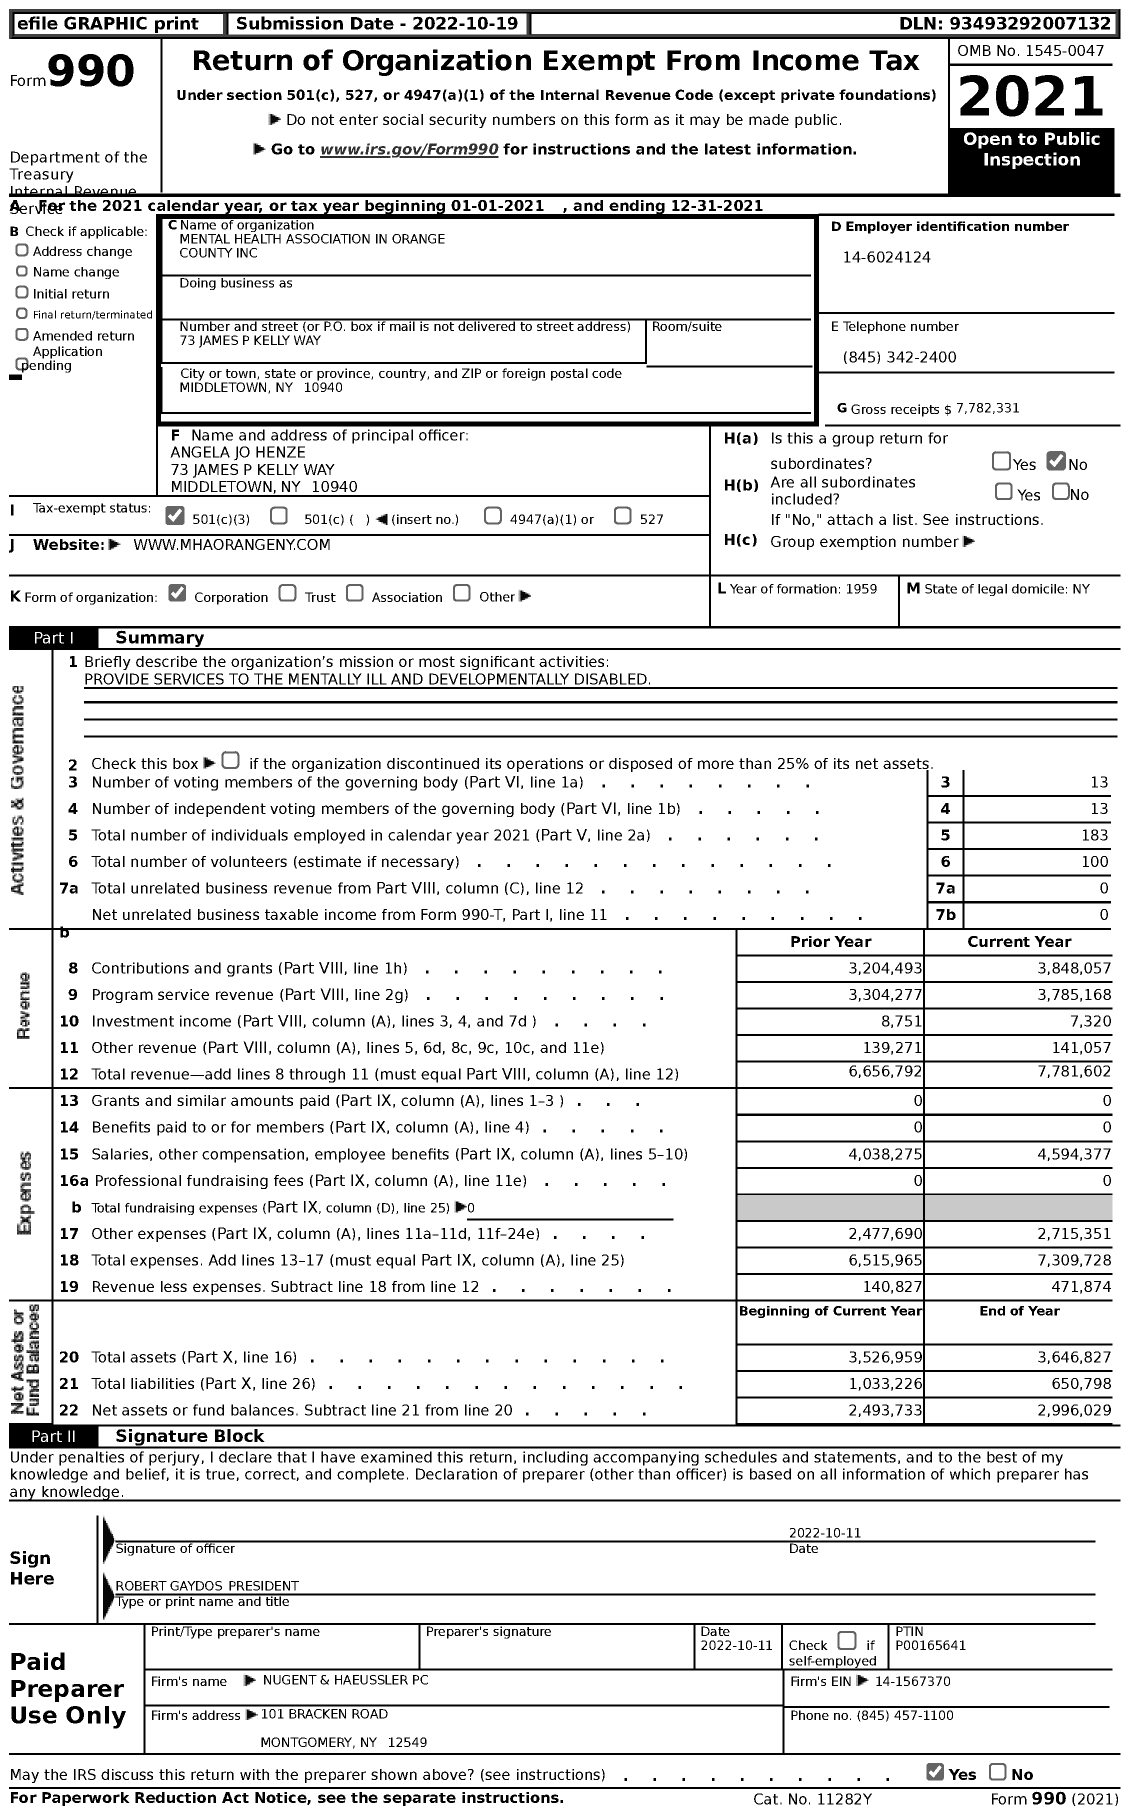 Image of first page of 2021 Form 990 for Mental Health Association in Orange County (MHA)